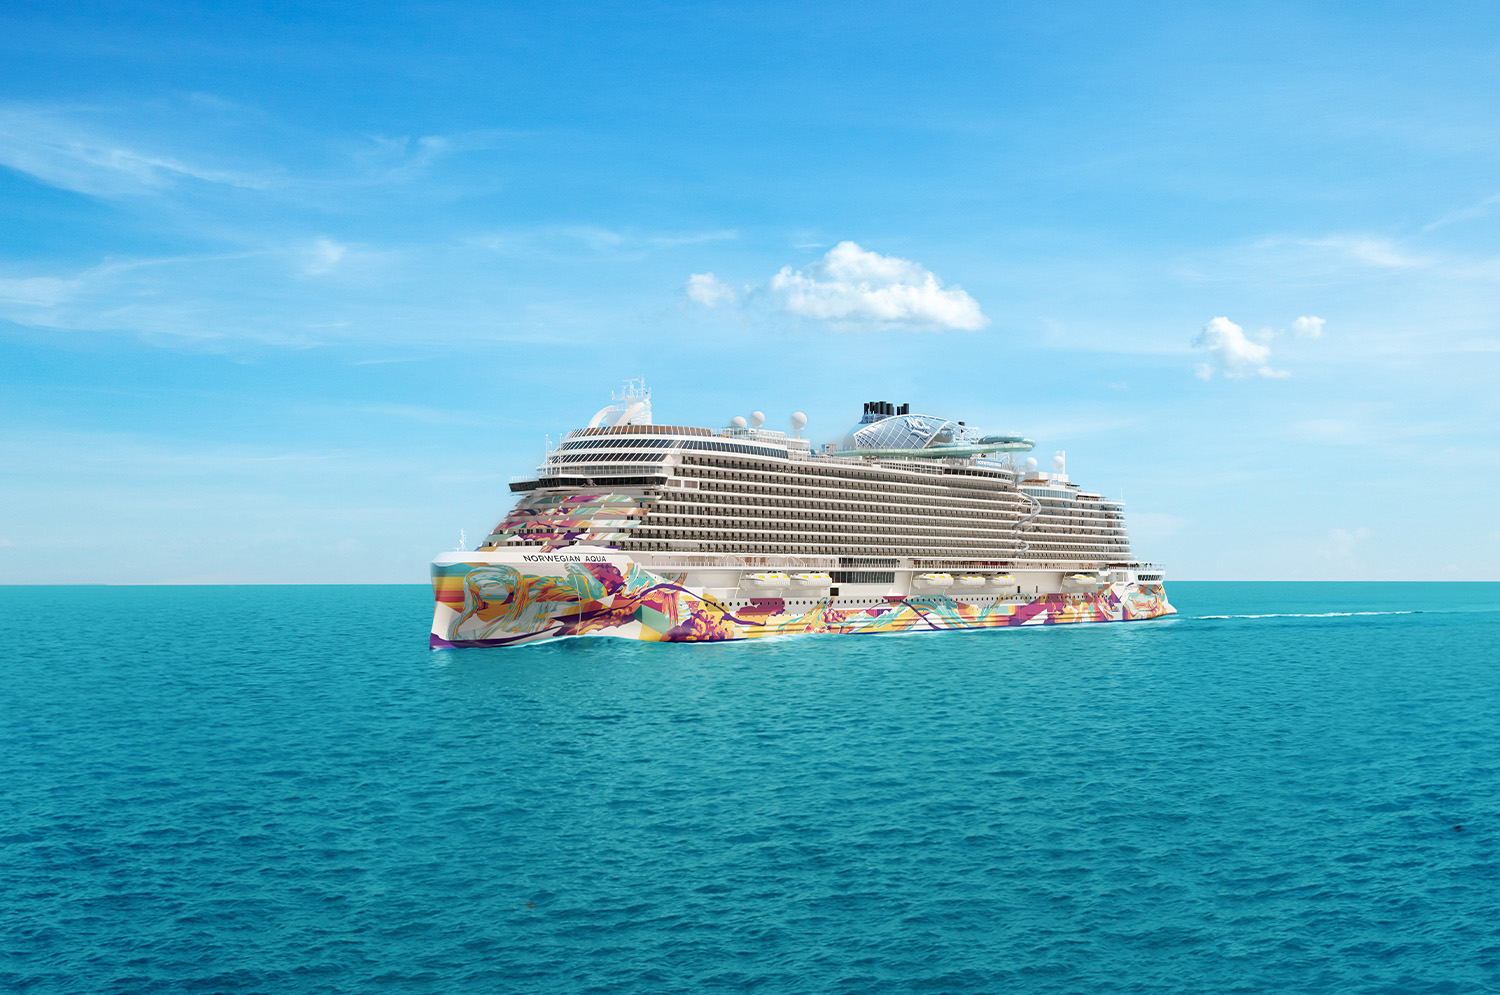 Norwegian Cruise Line’s newest ship, Norwegian Aqua, is the first in the all-new Prima Plus Class, the next generation of ships following the award-winning Norwegian Prima and Norwegian Viva.